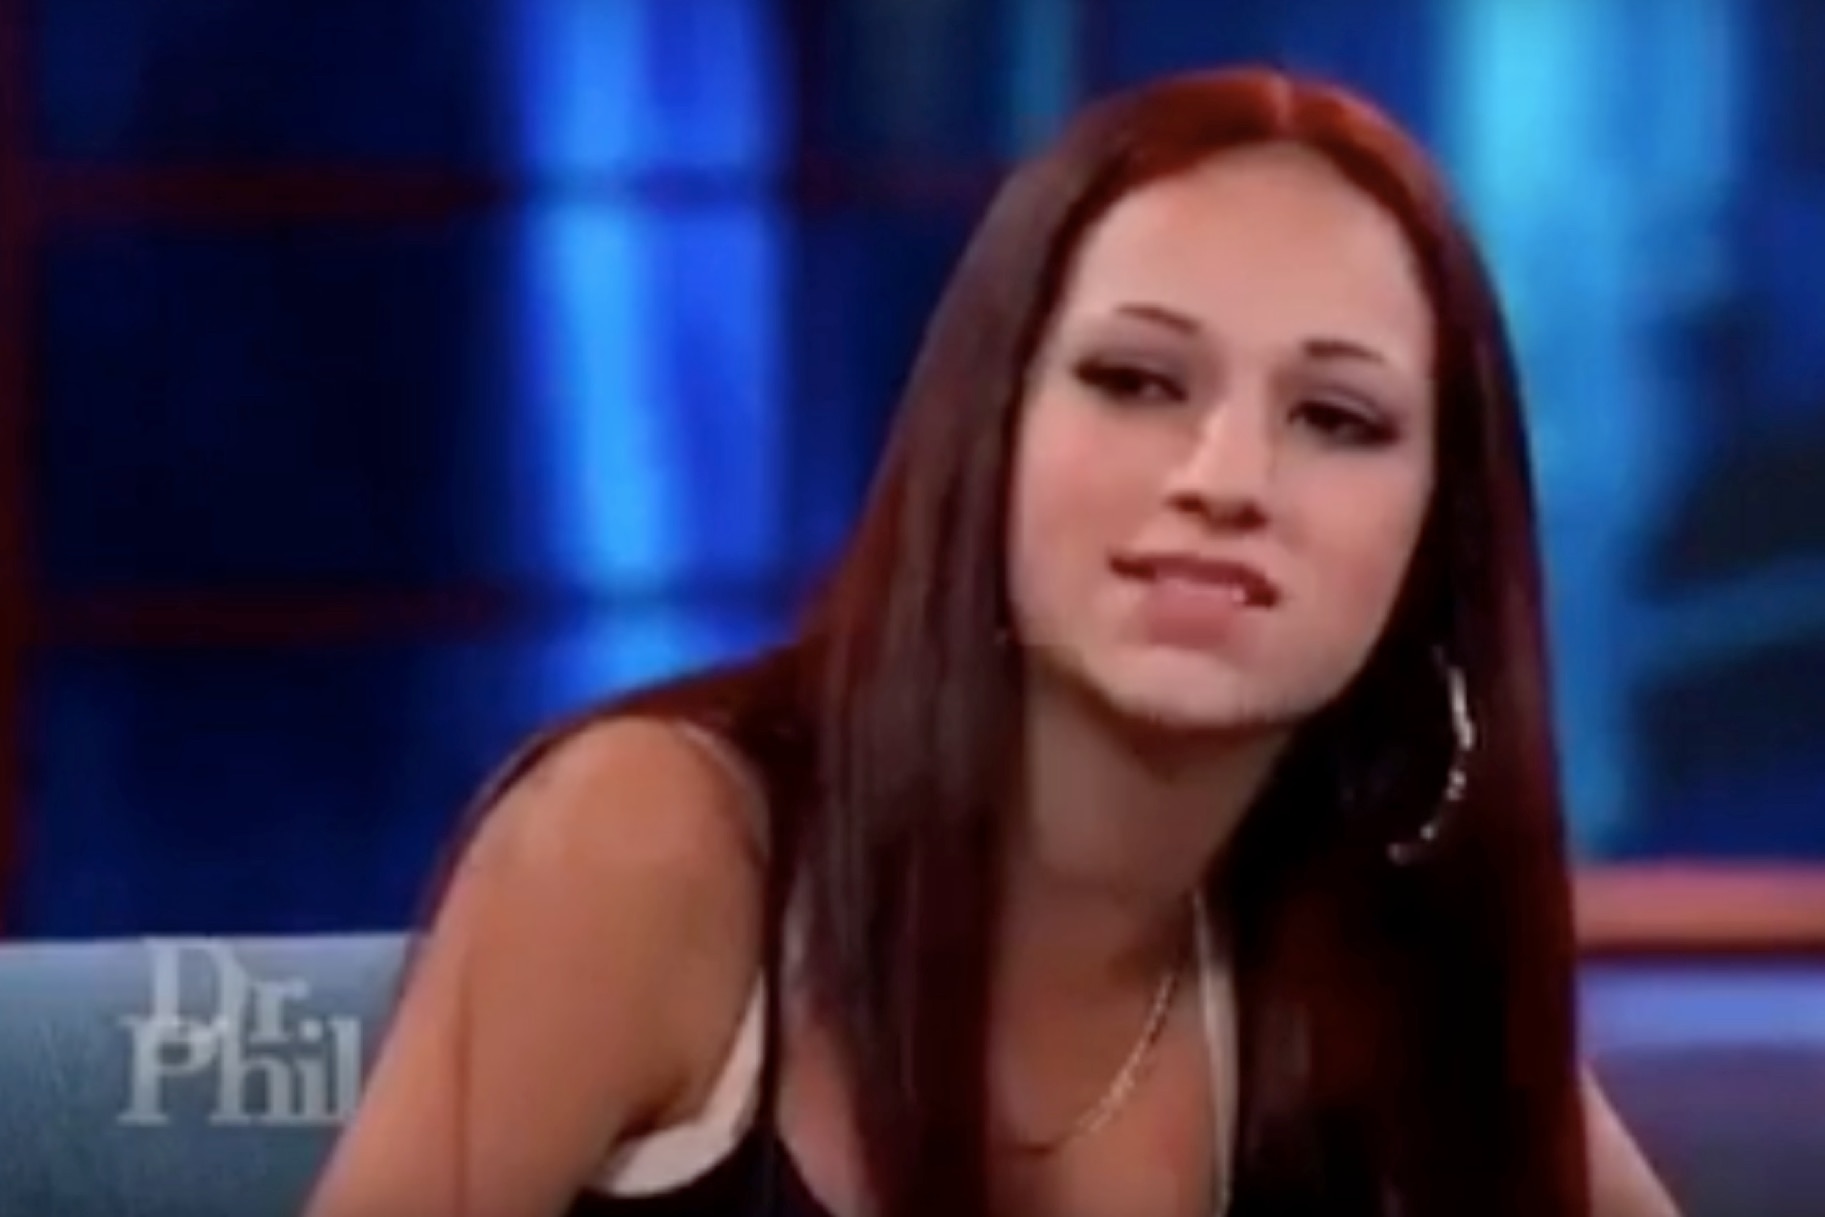 Viral Hood White Girl From Dr Phil Takes A Beatdown On Camera Very